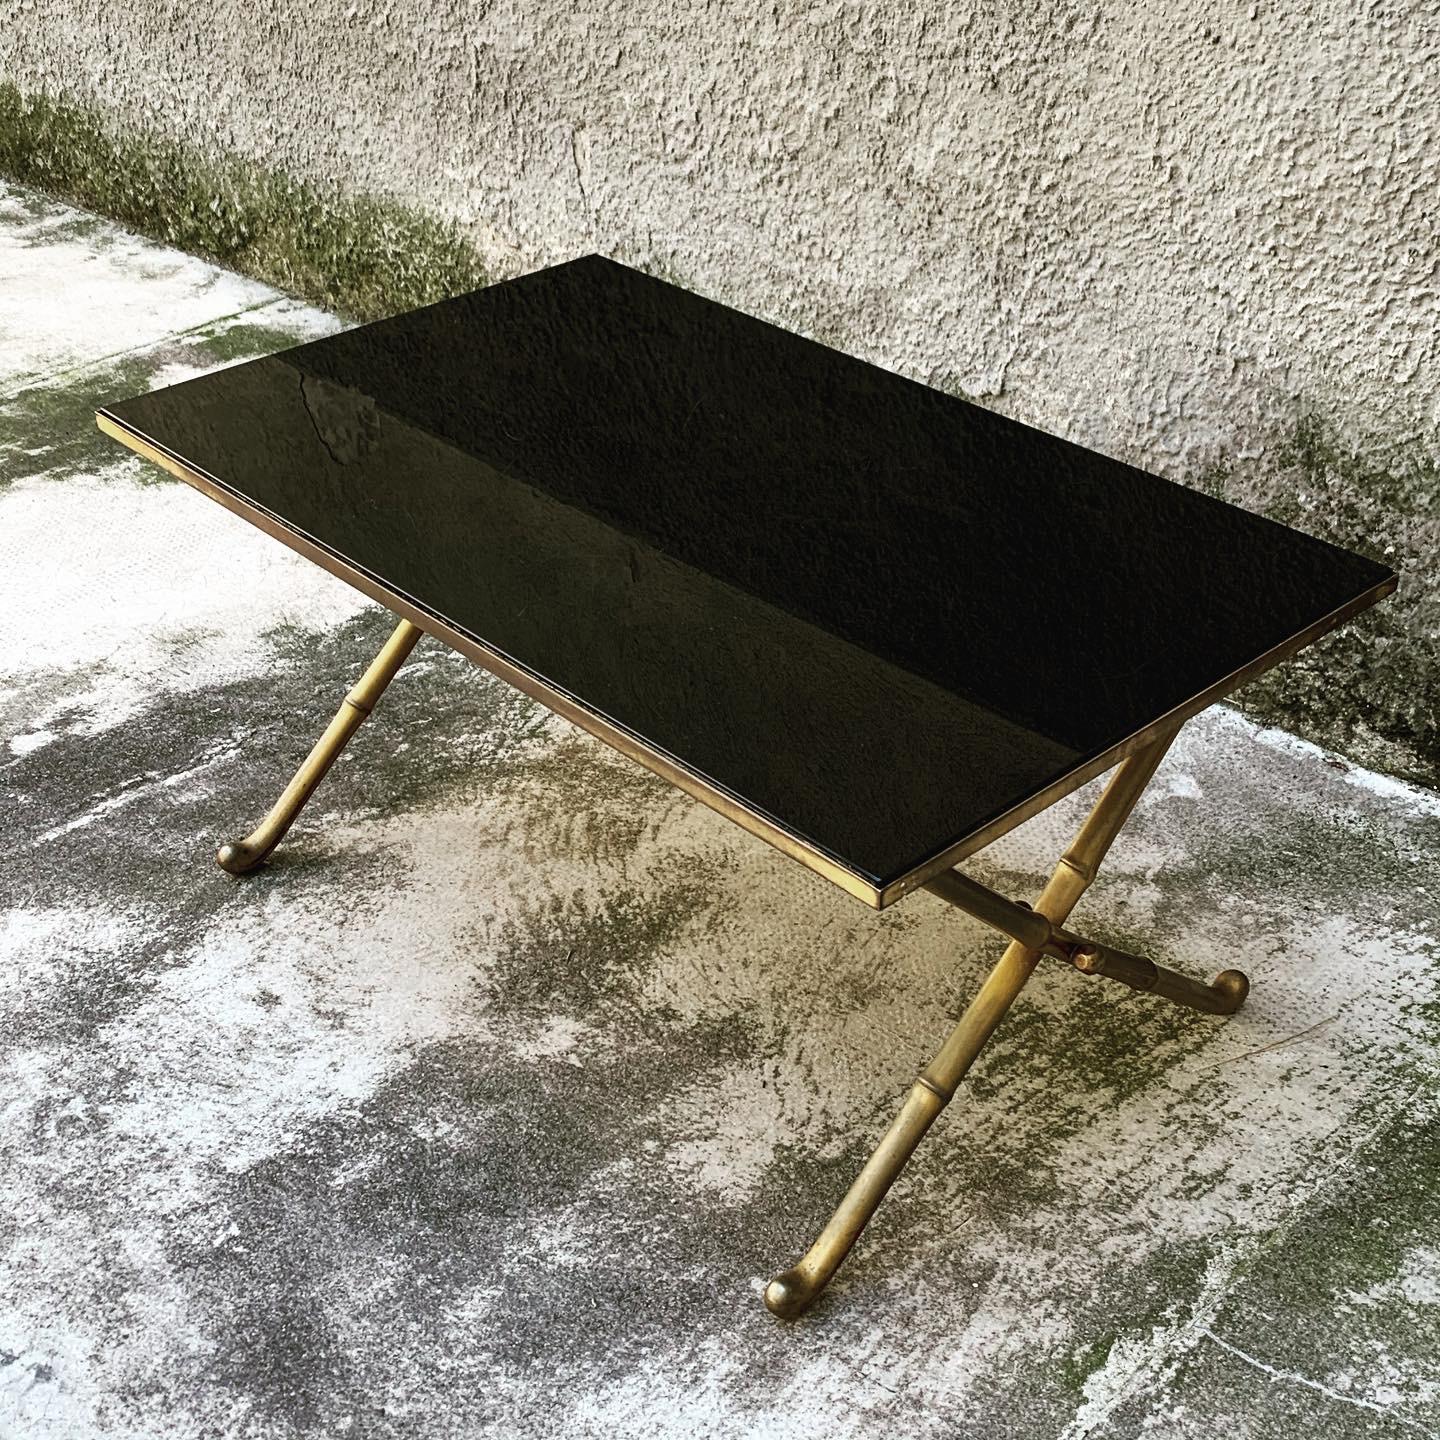 Small brass coffee table with black opaline glass top and X-shaped cross legs, from the mid-20th century period.
The glass top has several surface scratches.